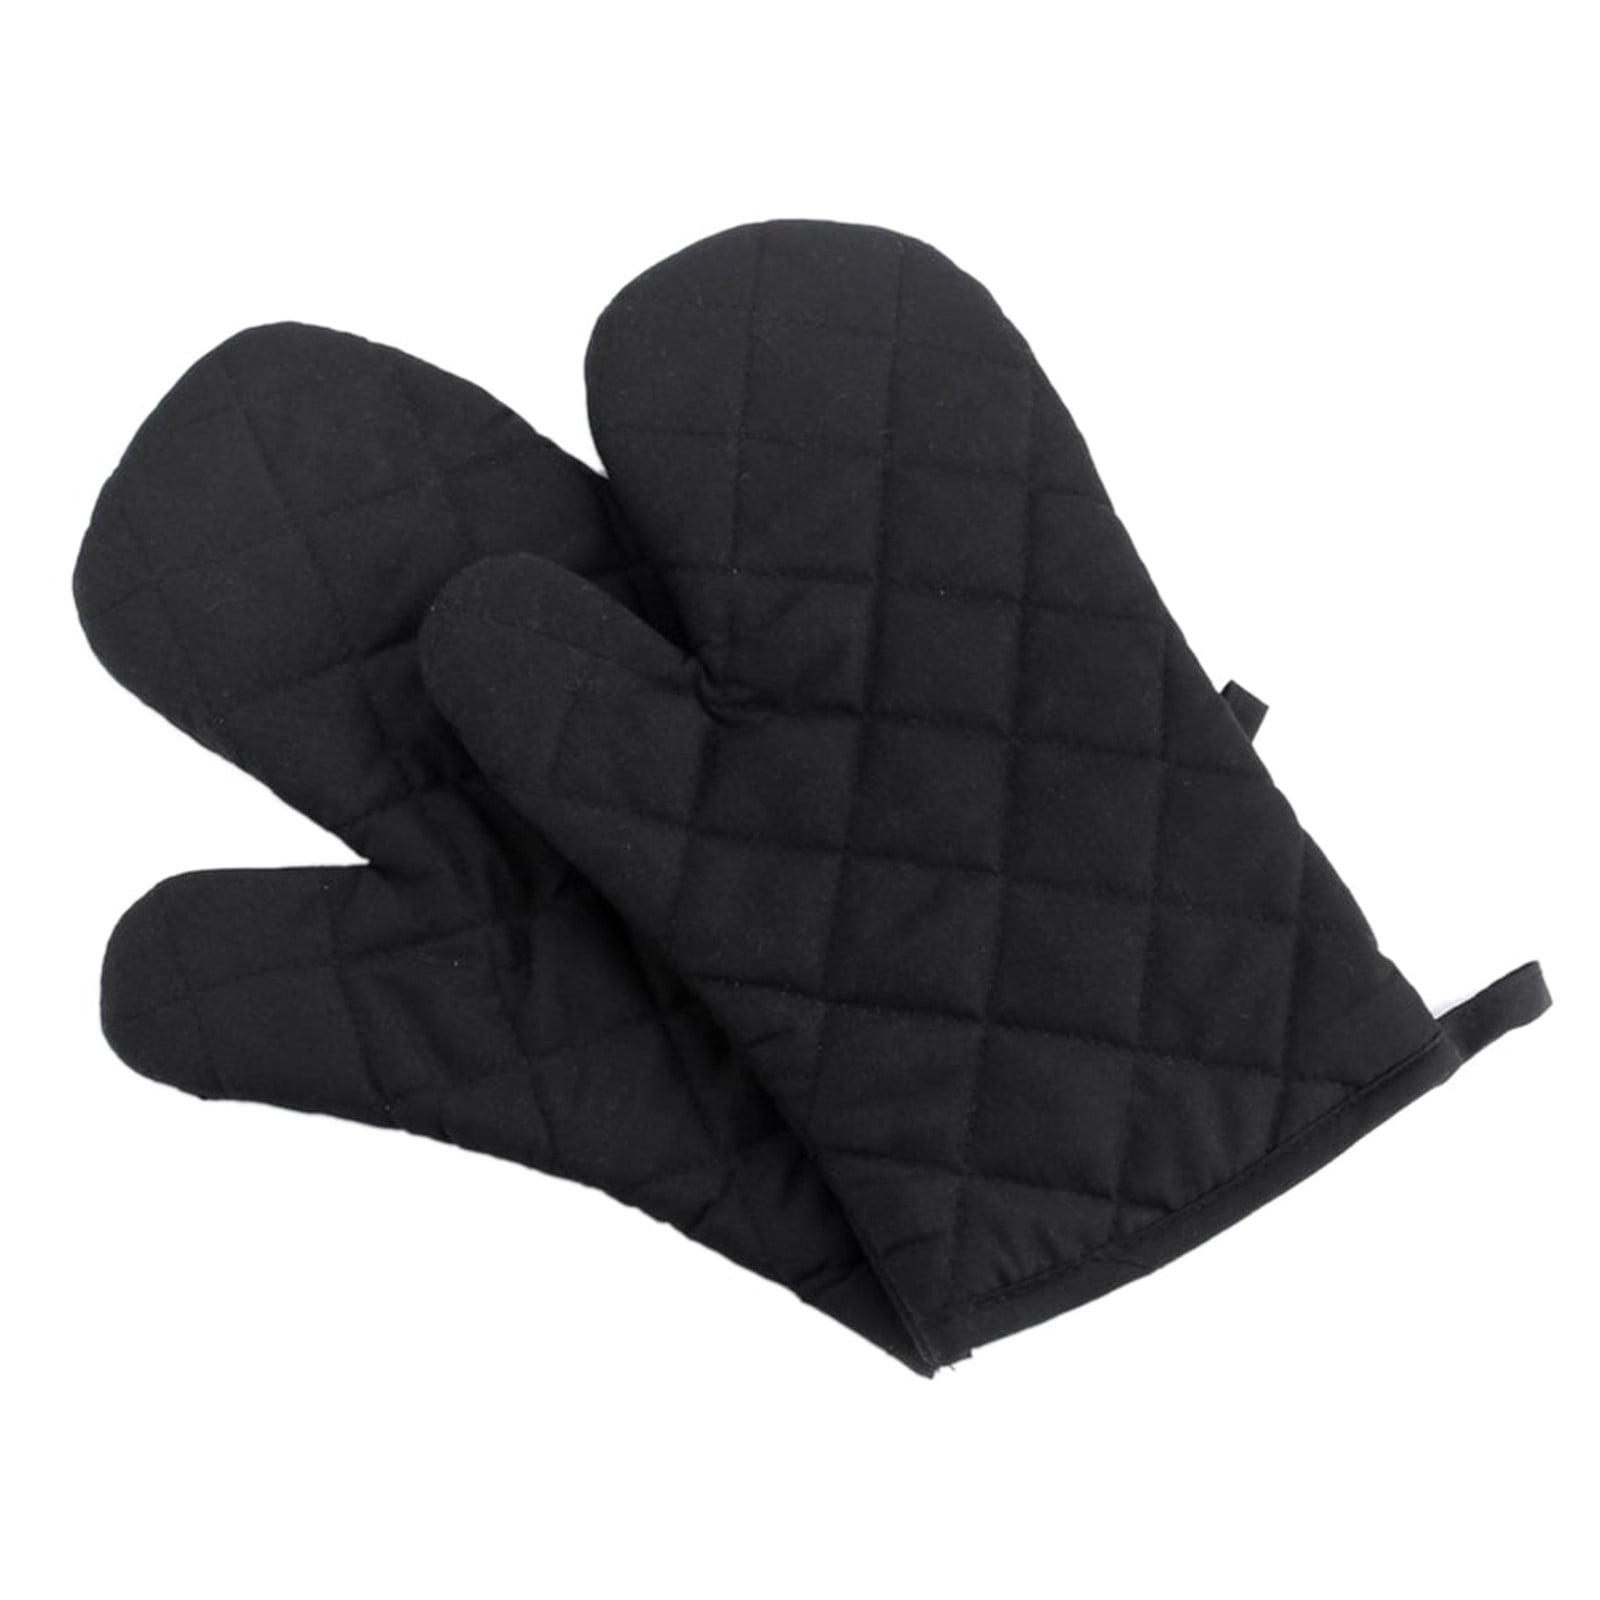 TeamSky Short Oven Mitts, Oven Gloves Cooking Mitts Pair Heat